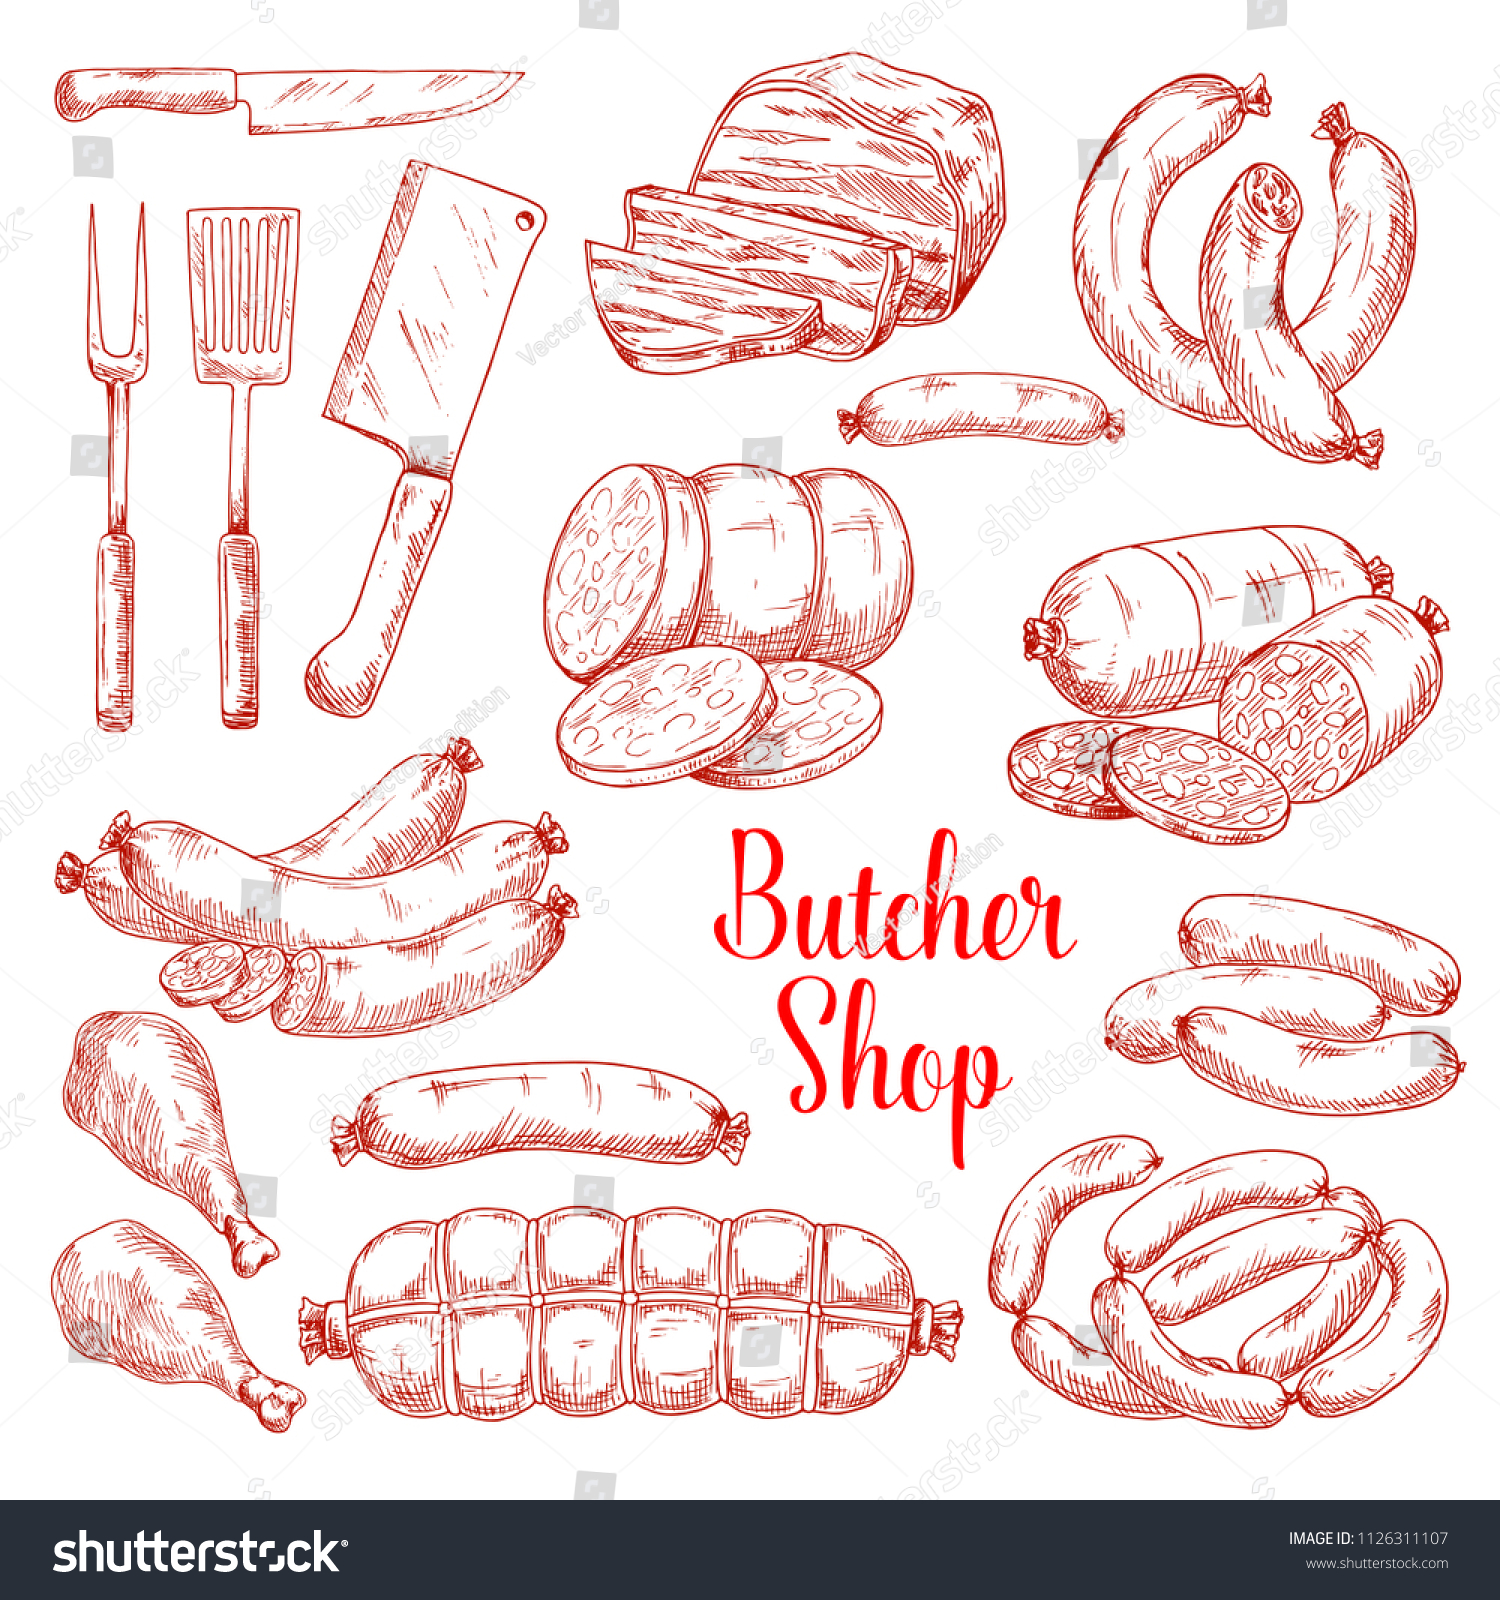 Butcher shop meat products vector isolated sketch icons. Butchery gourmet delicatessen and gastronomy brats and frankfurter sausages. ham or hamon and bacon brisket, wiener and frankfurter salami #1126311107